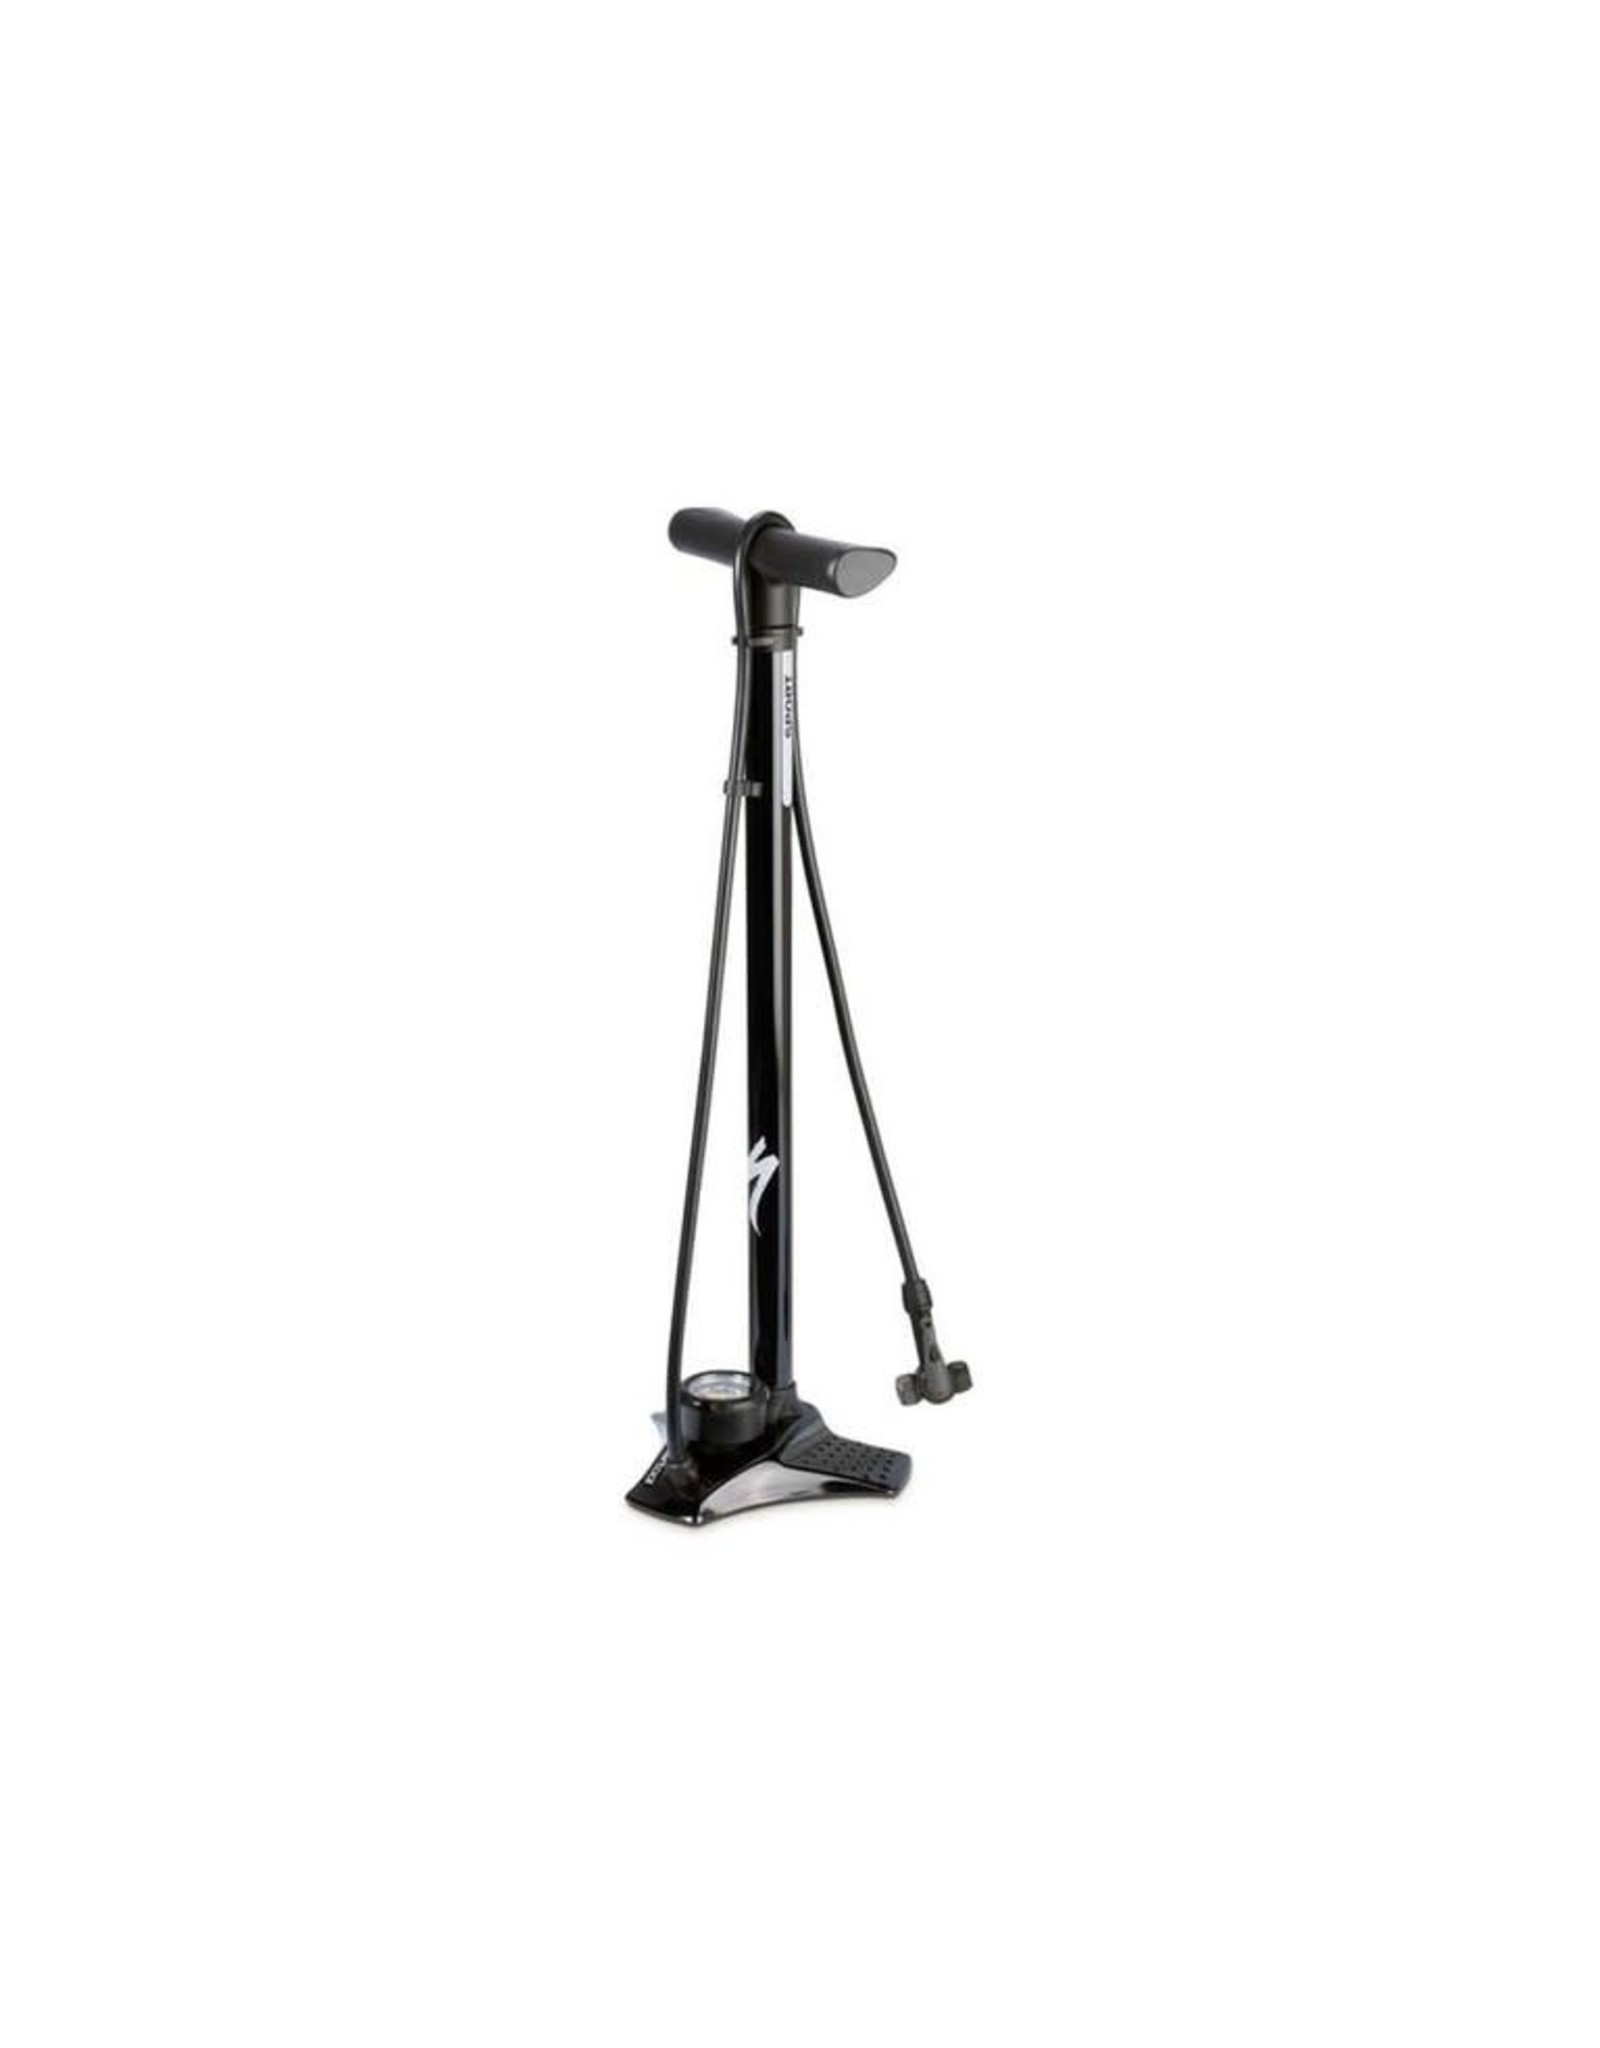 specialized air tool sport switchhitter ii floor pump black